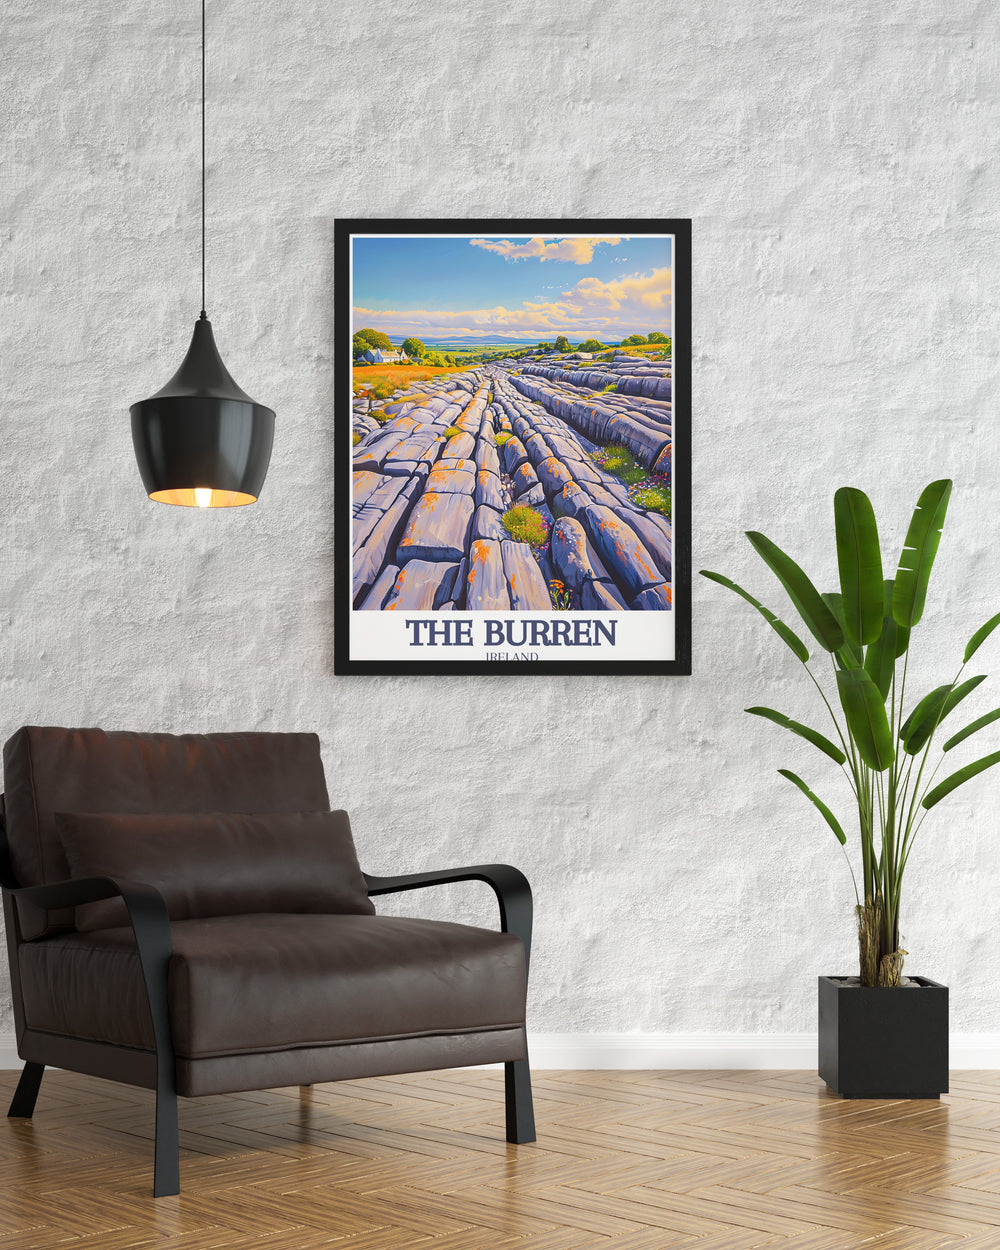 Beautiful Burren National Park Kilfenora village wall art capturing the unique limestone pavements and vibrant wildflowers of County Clare ideal for home decor and gifts